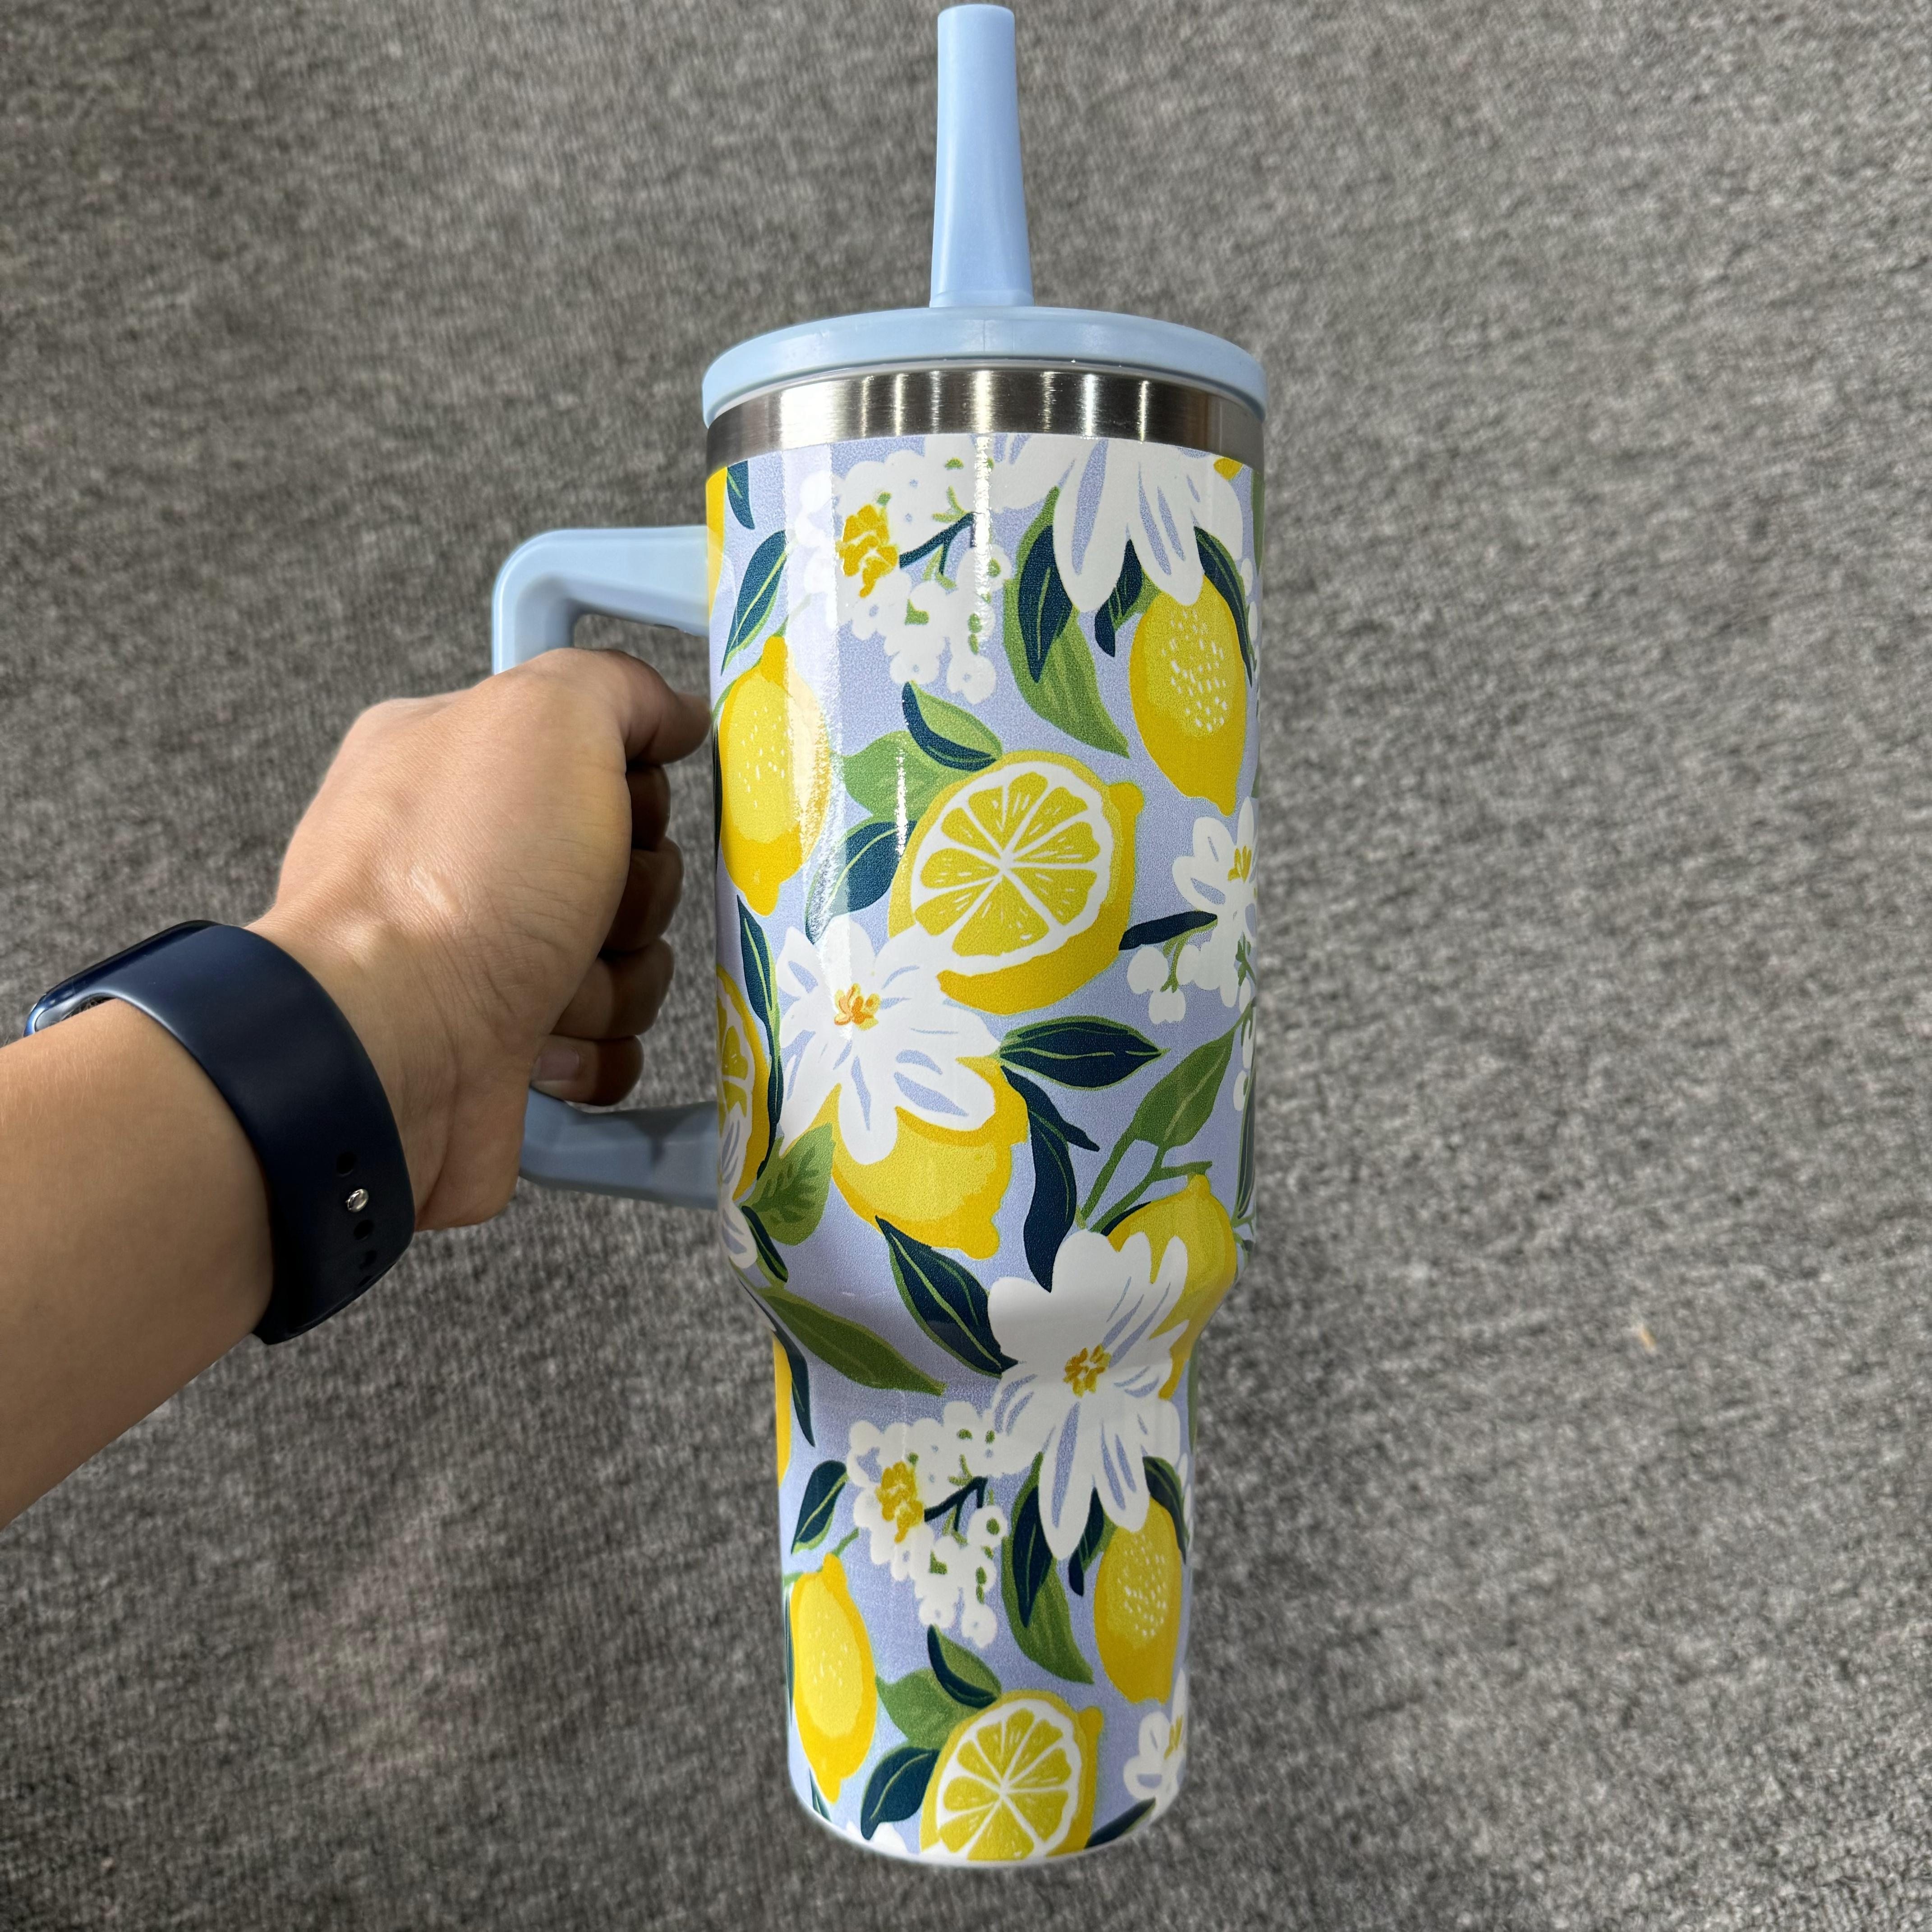 

40oz Stainless Steel Tumbler With Lid & Straw - Fruit Lemon Print, Reusable Travel Cup For Hot And Cold Beverages